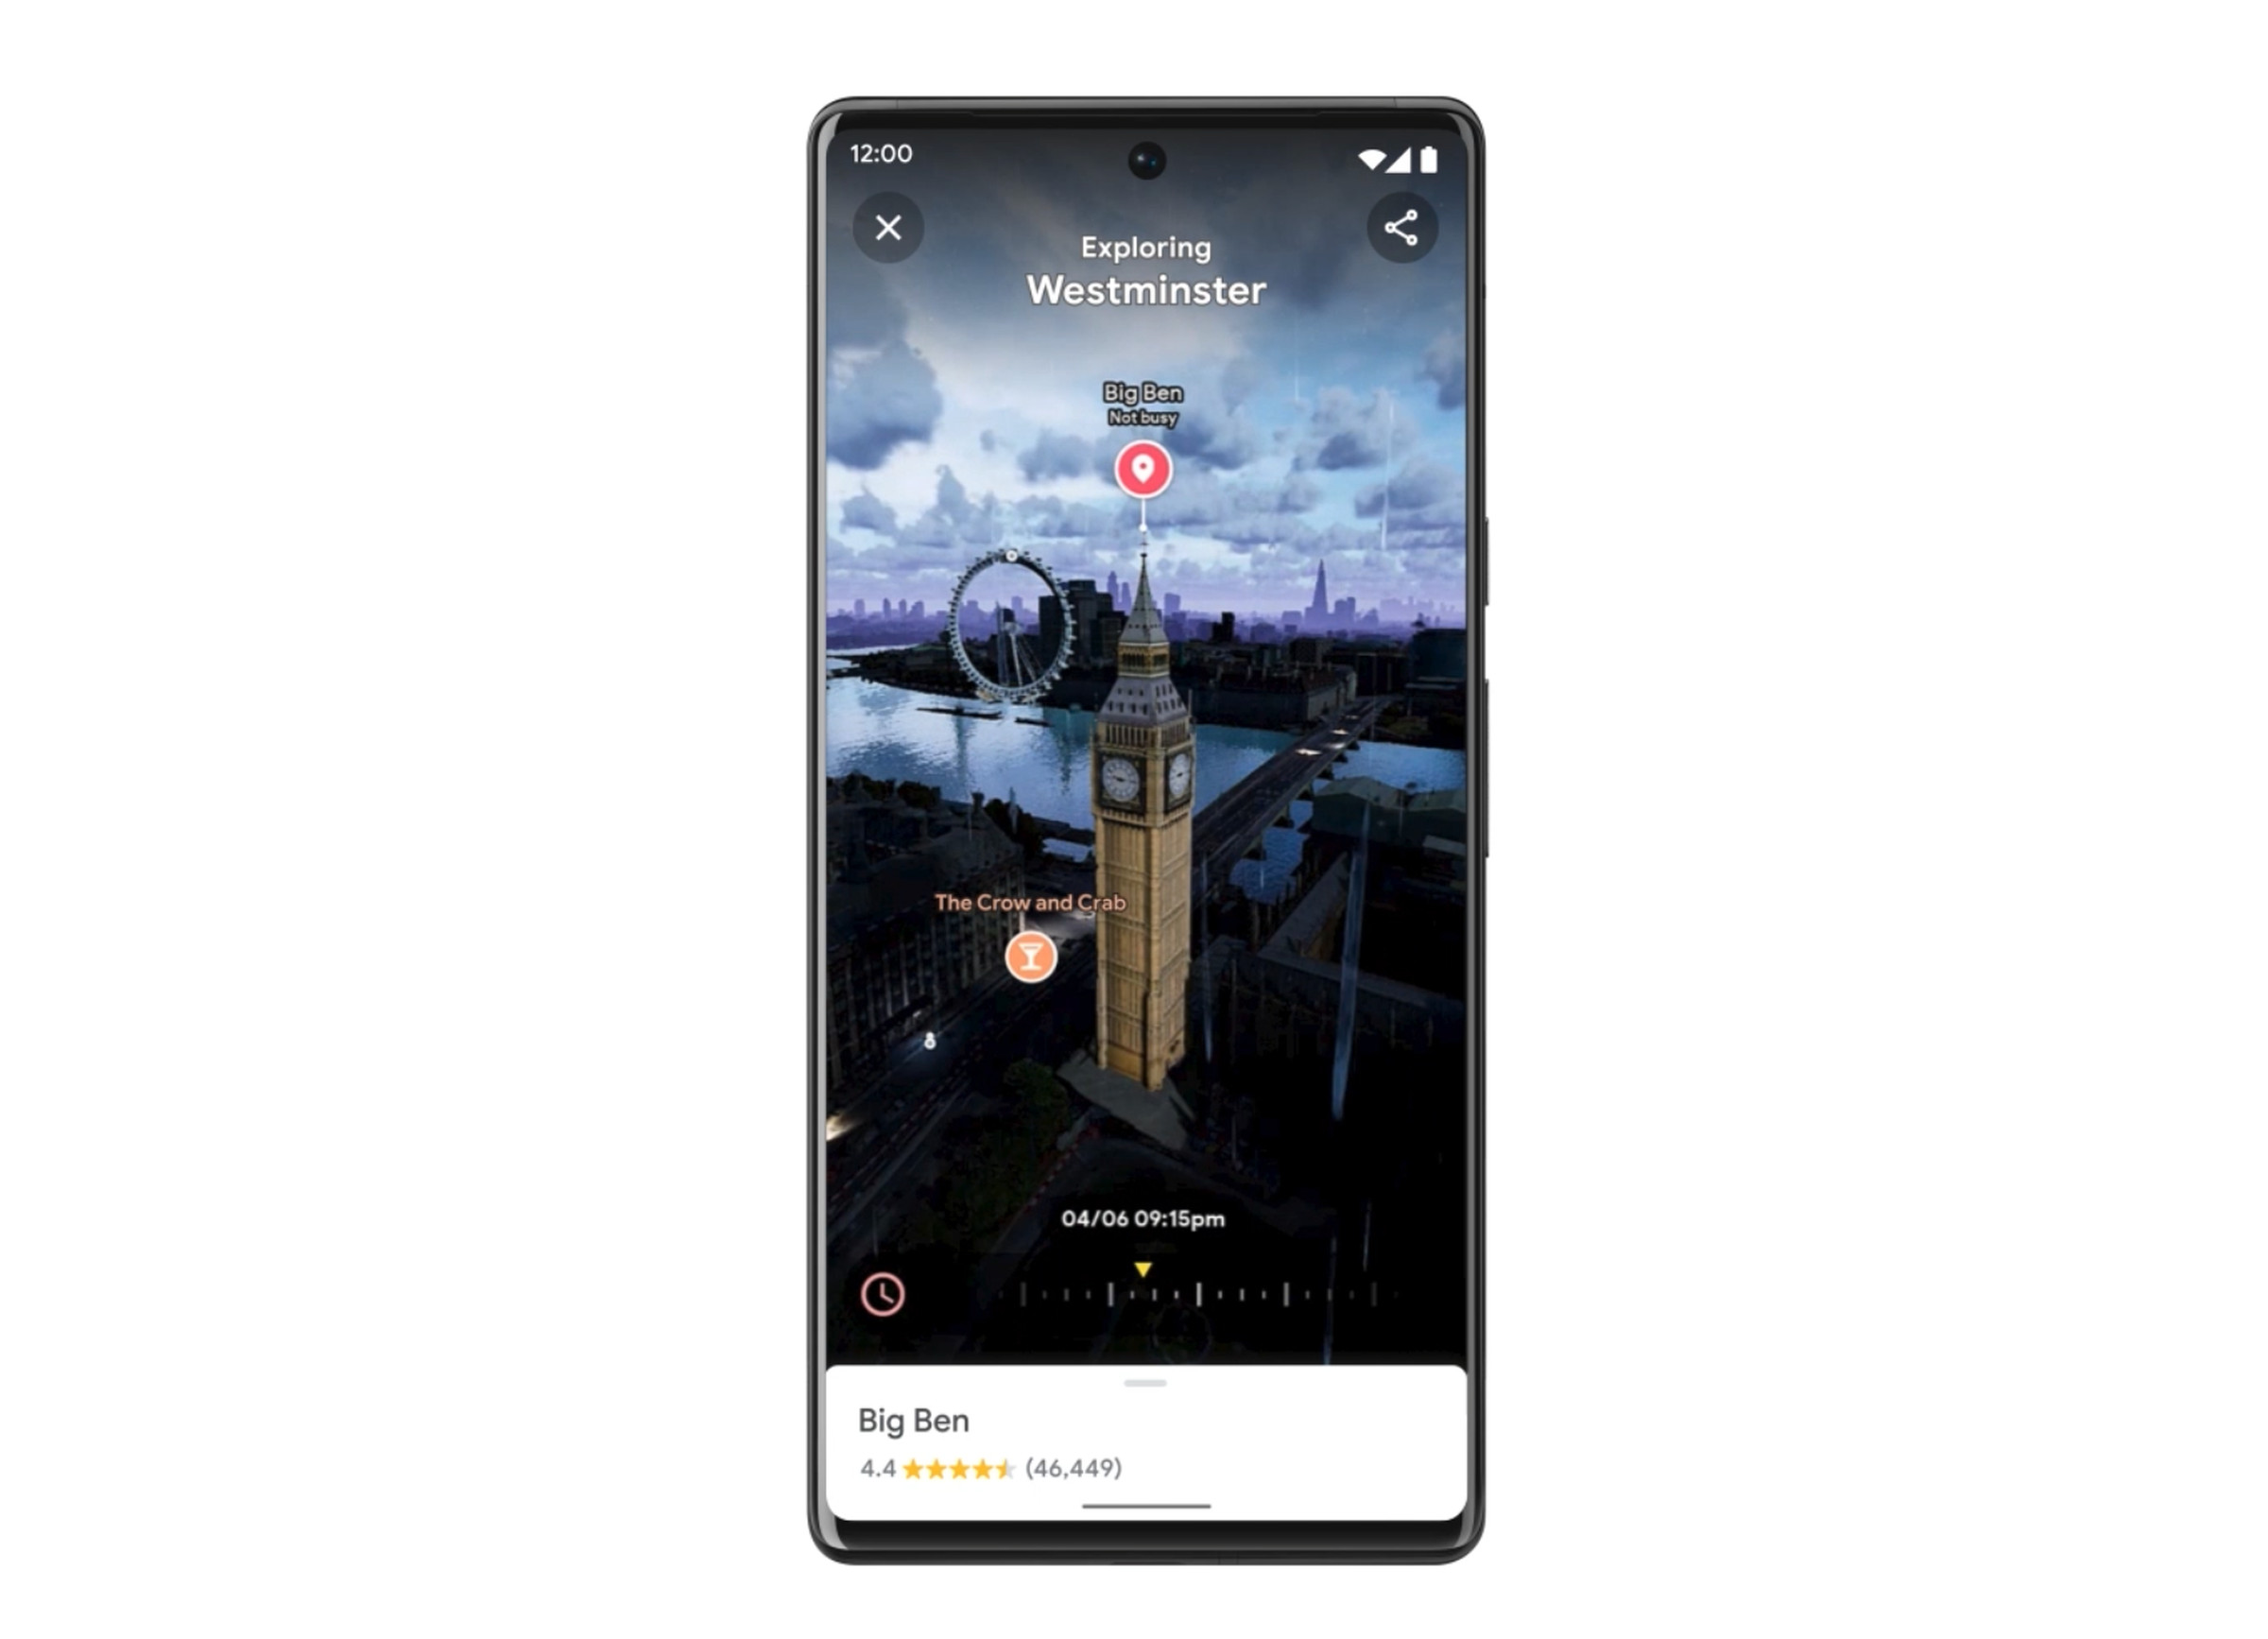 London is one of the cities Immersive View is debuting in, along with San Francisco, New York, Los Angeles, and Tokyo.